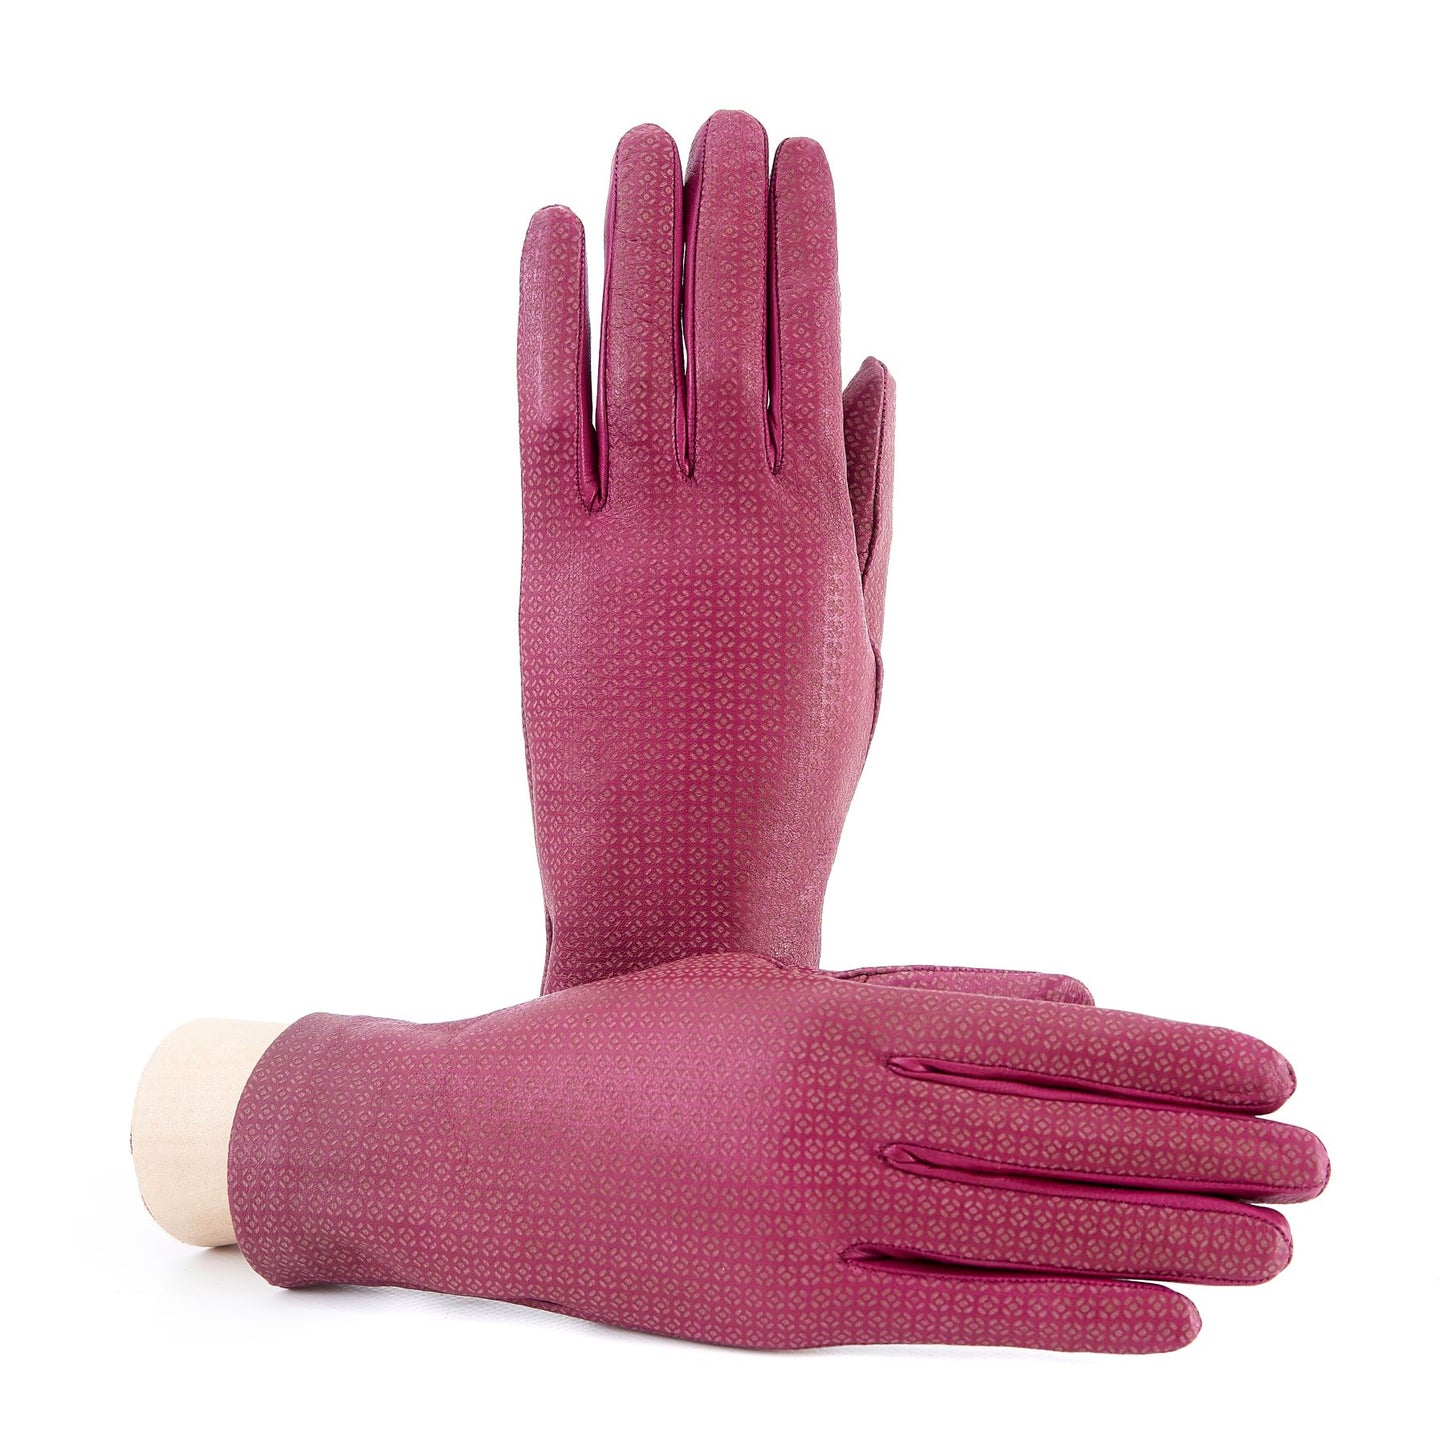 Women's unlined purple nappa leather gloves with all over laser cut detail